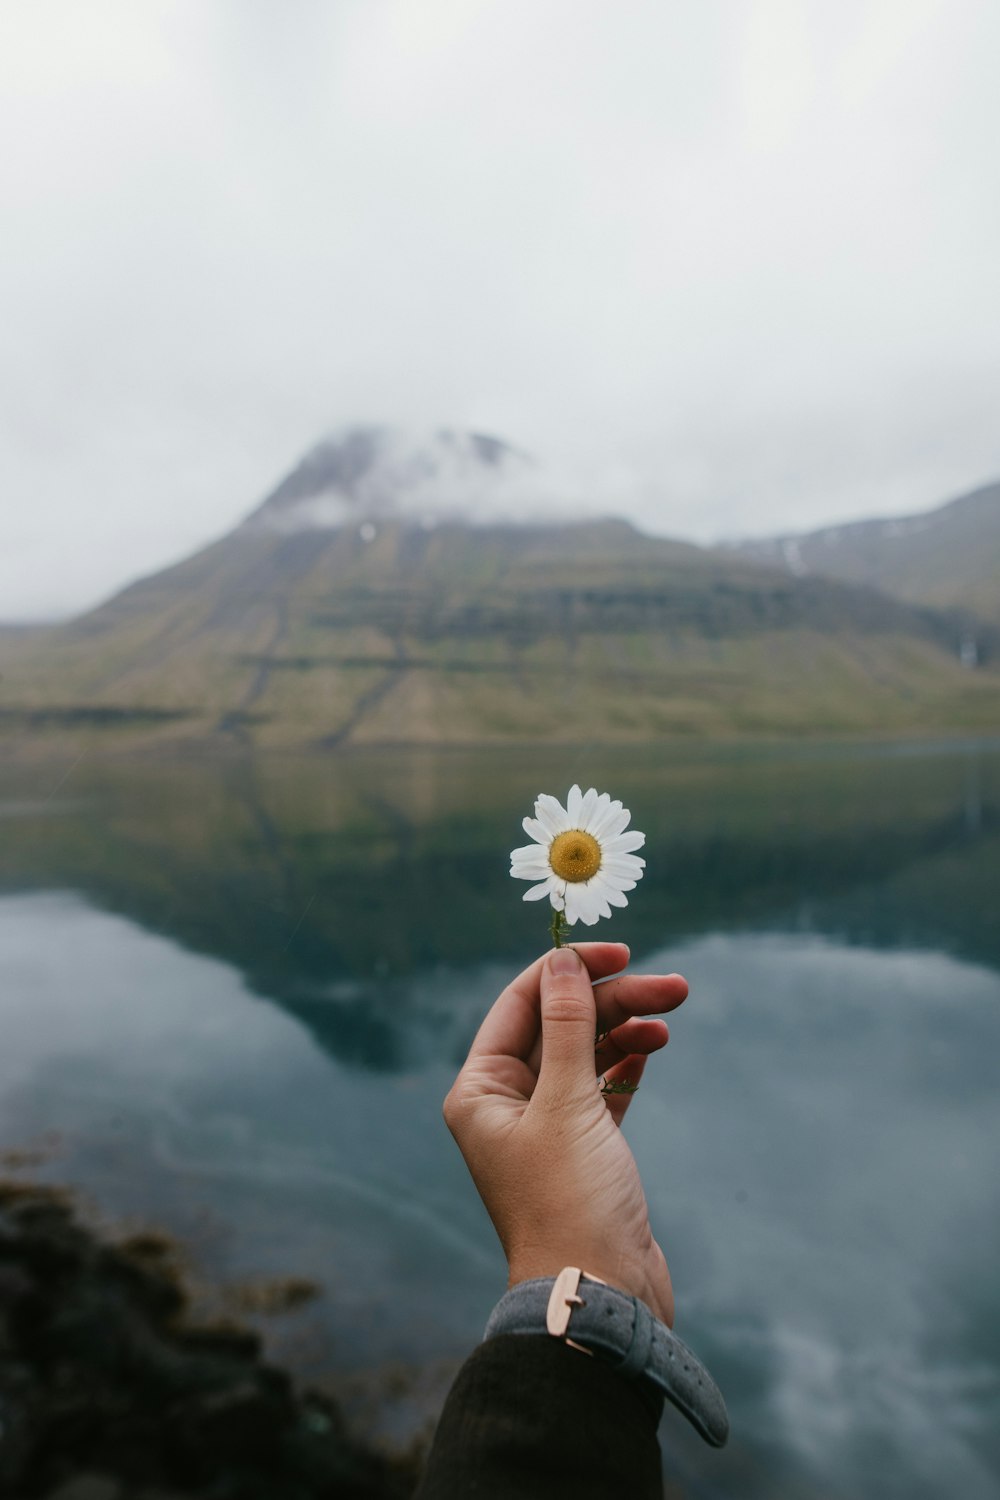 person holding white daisy flower